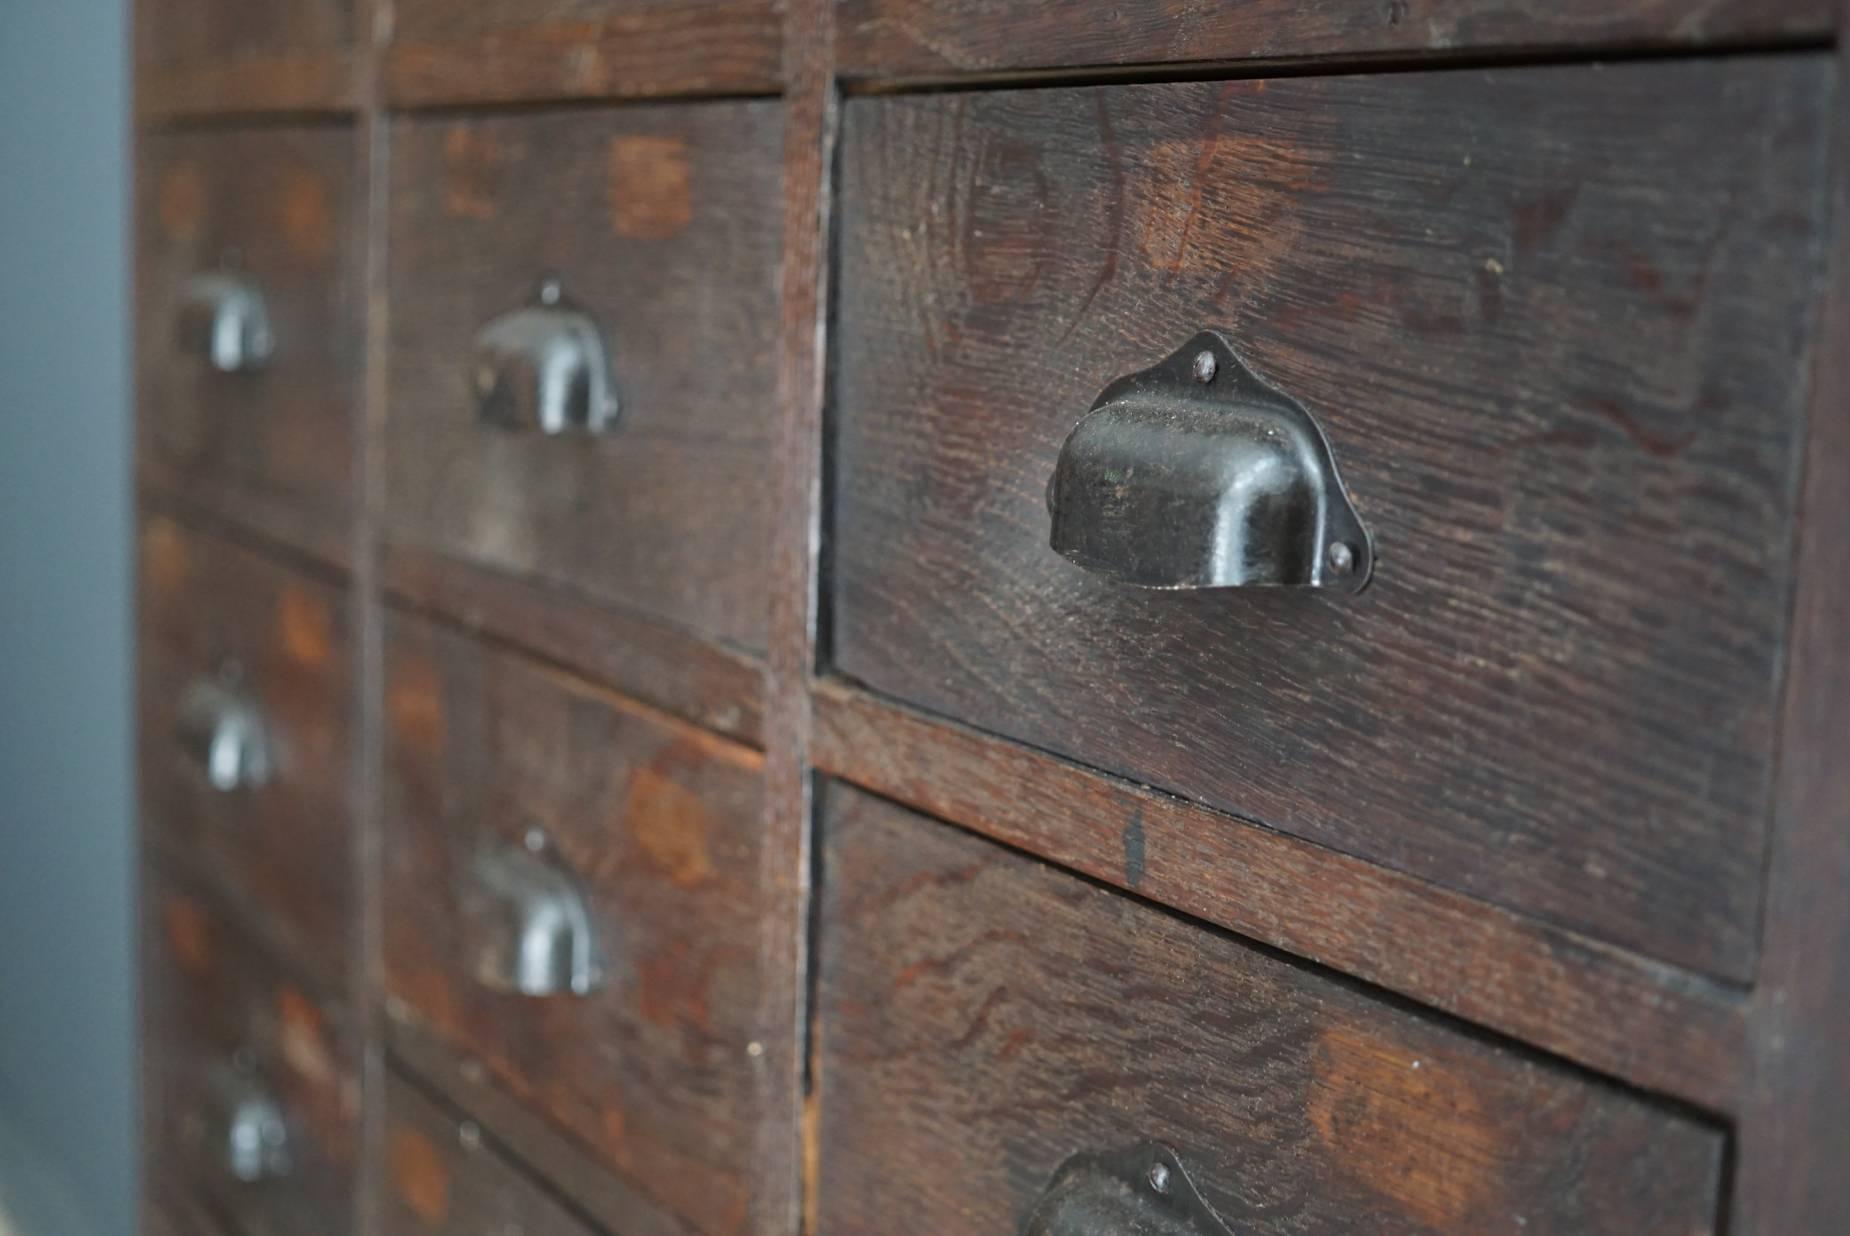 This apothecary bank of drawers was designed and made, circa 1930. The piece is made from oak with cup handles.